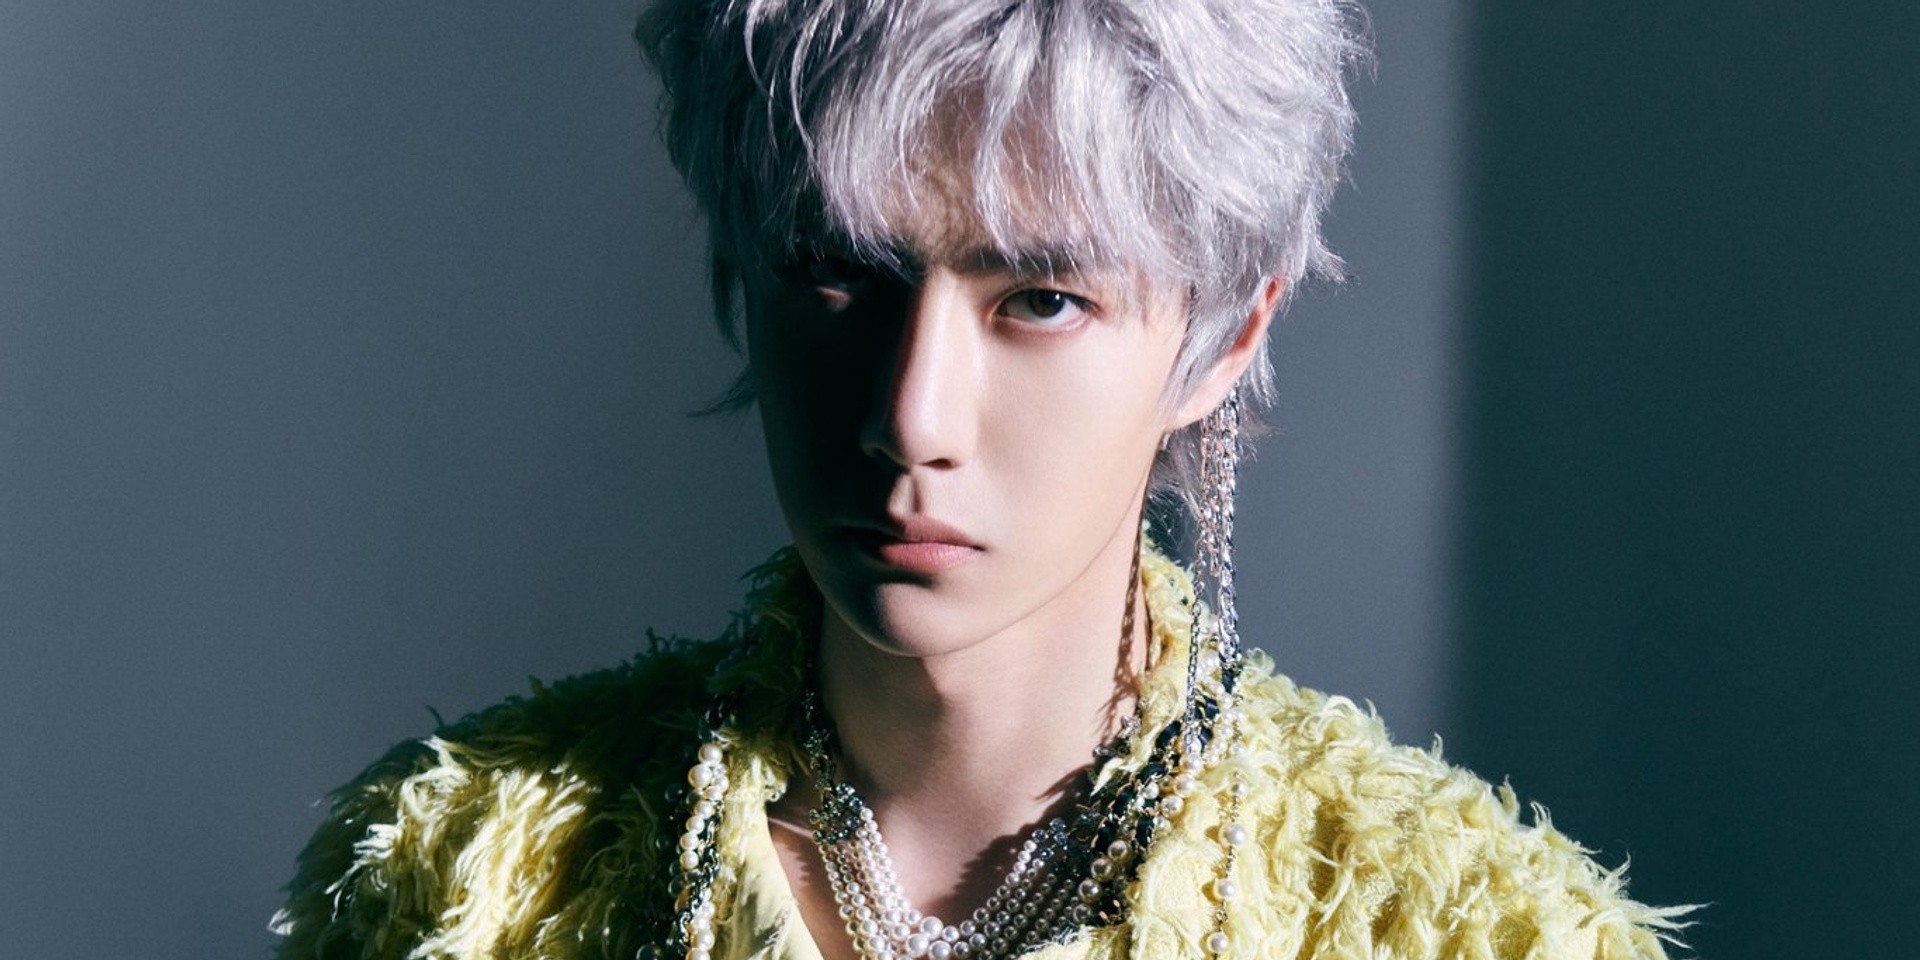 Wang Yibo releases new single, ‘The Rules Of My World’ – listen